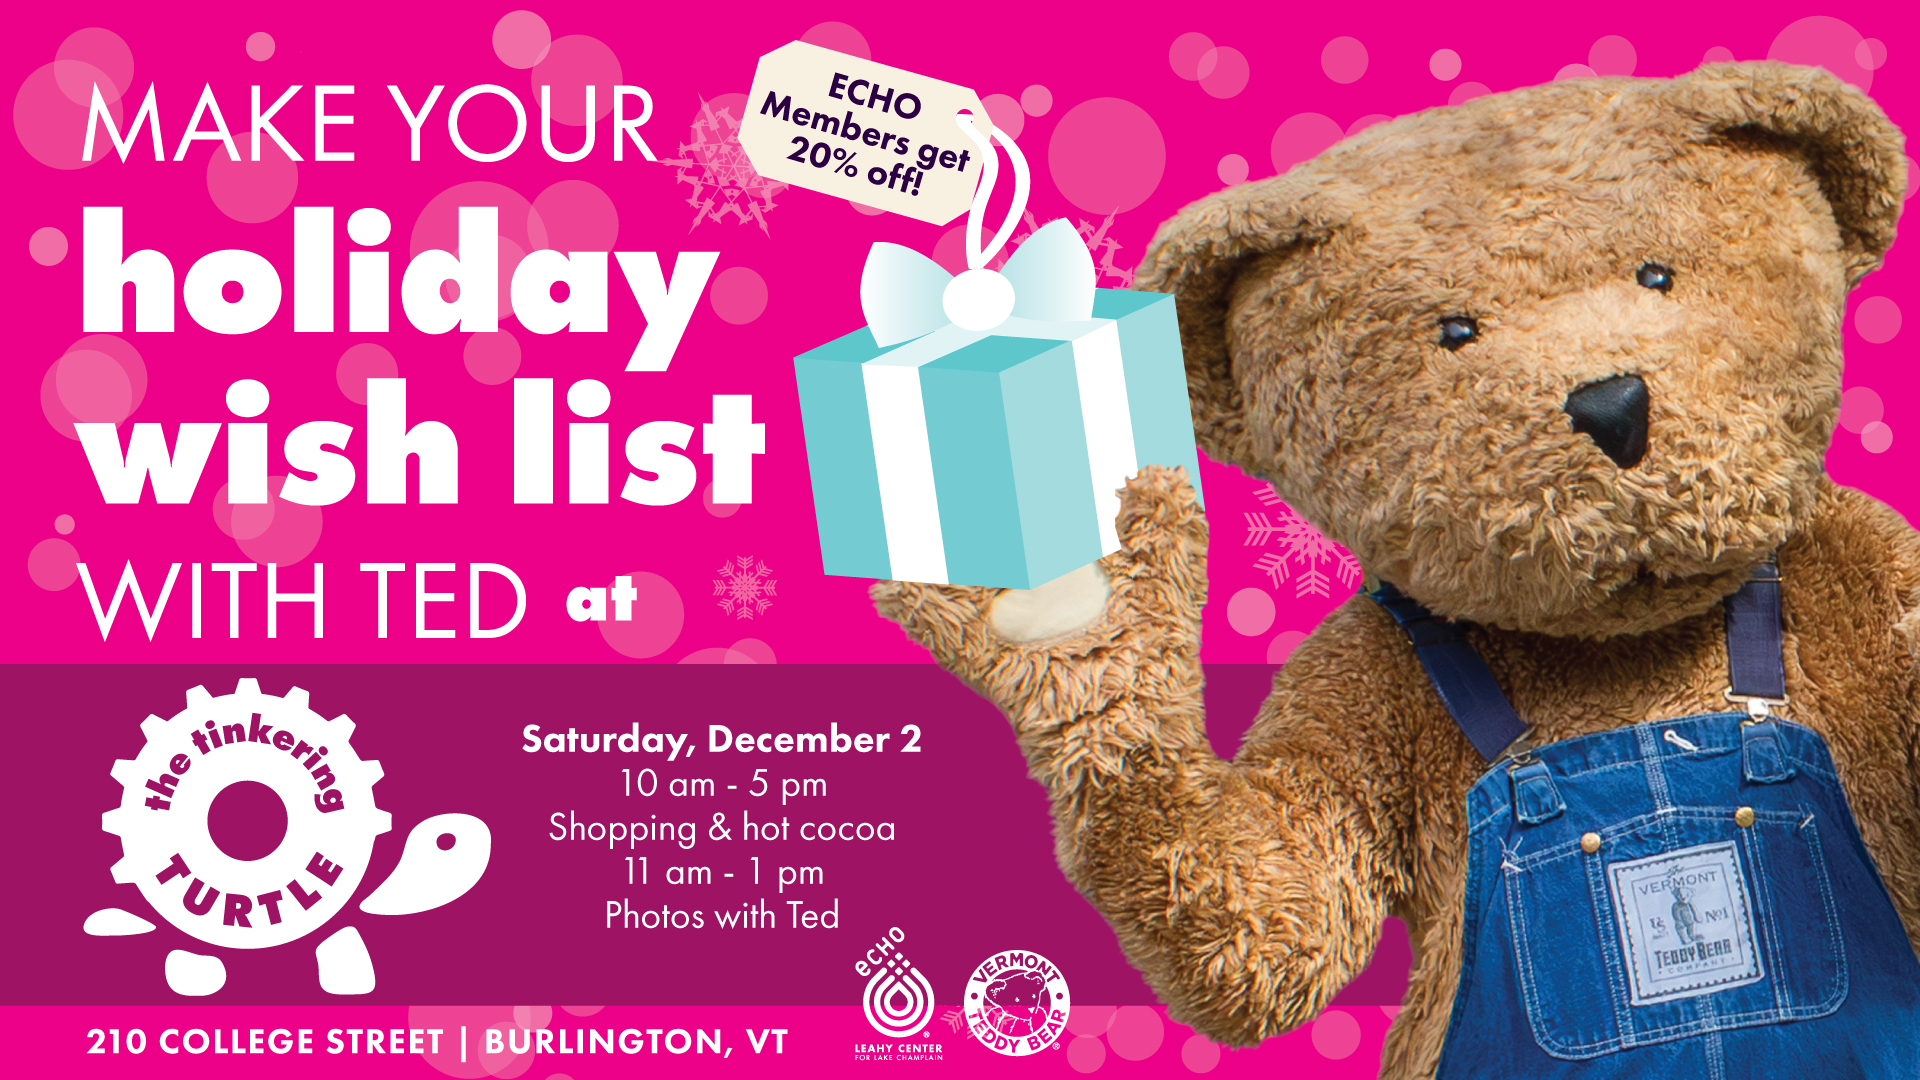 make Your Holiday Wish List with Ted on Saturday, December 2 at The Tinkering Turtle. All proceeds go to supporting ECHO and science education. ECHO Members get 20% off. 10 am - 5 pm Shopping & Cocoa; 11 am - 1 pm Photos with Ted the Vermont Teddy Mascot